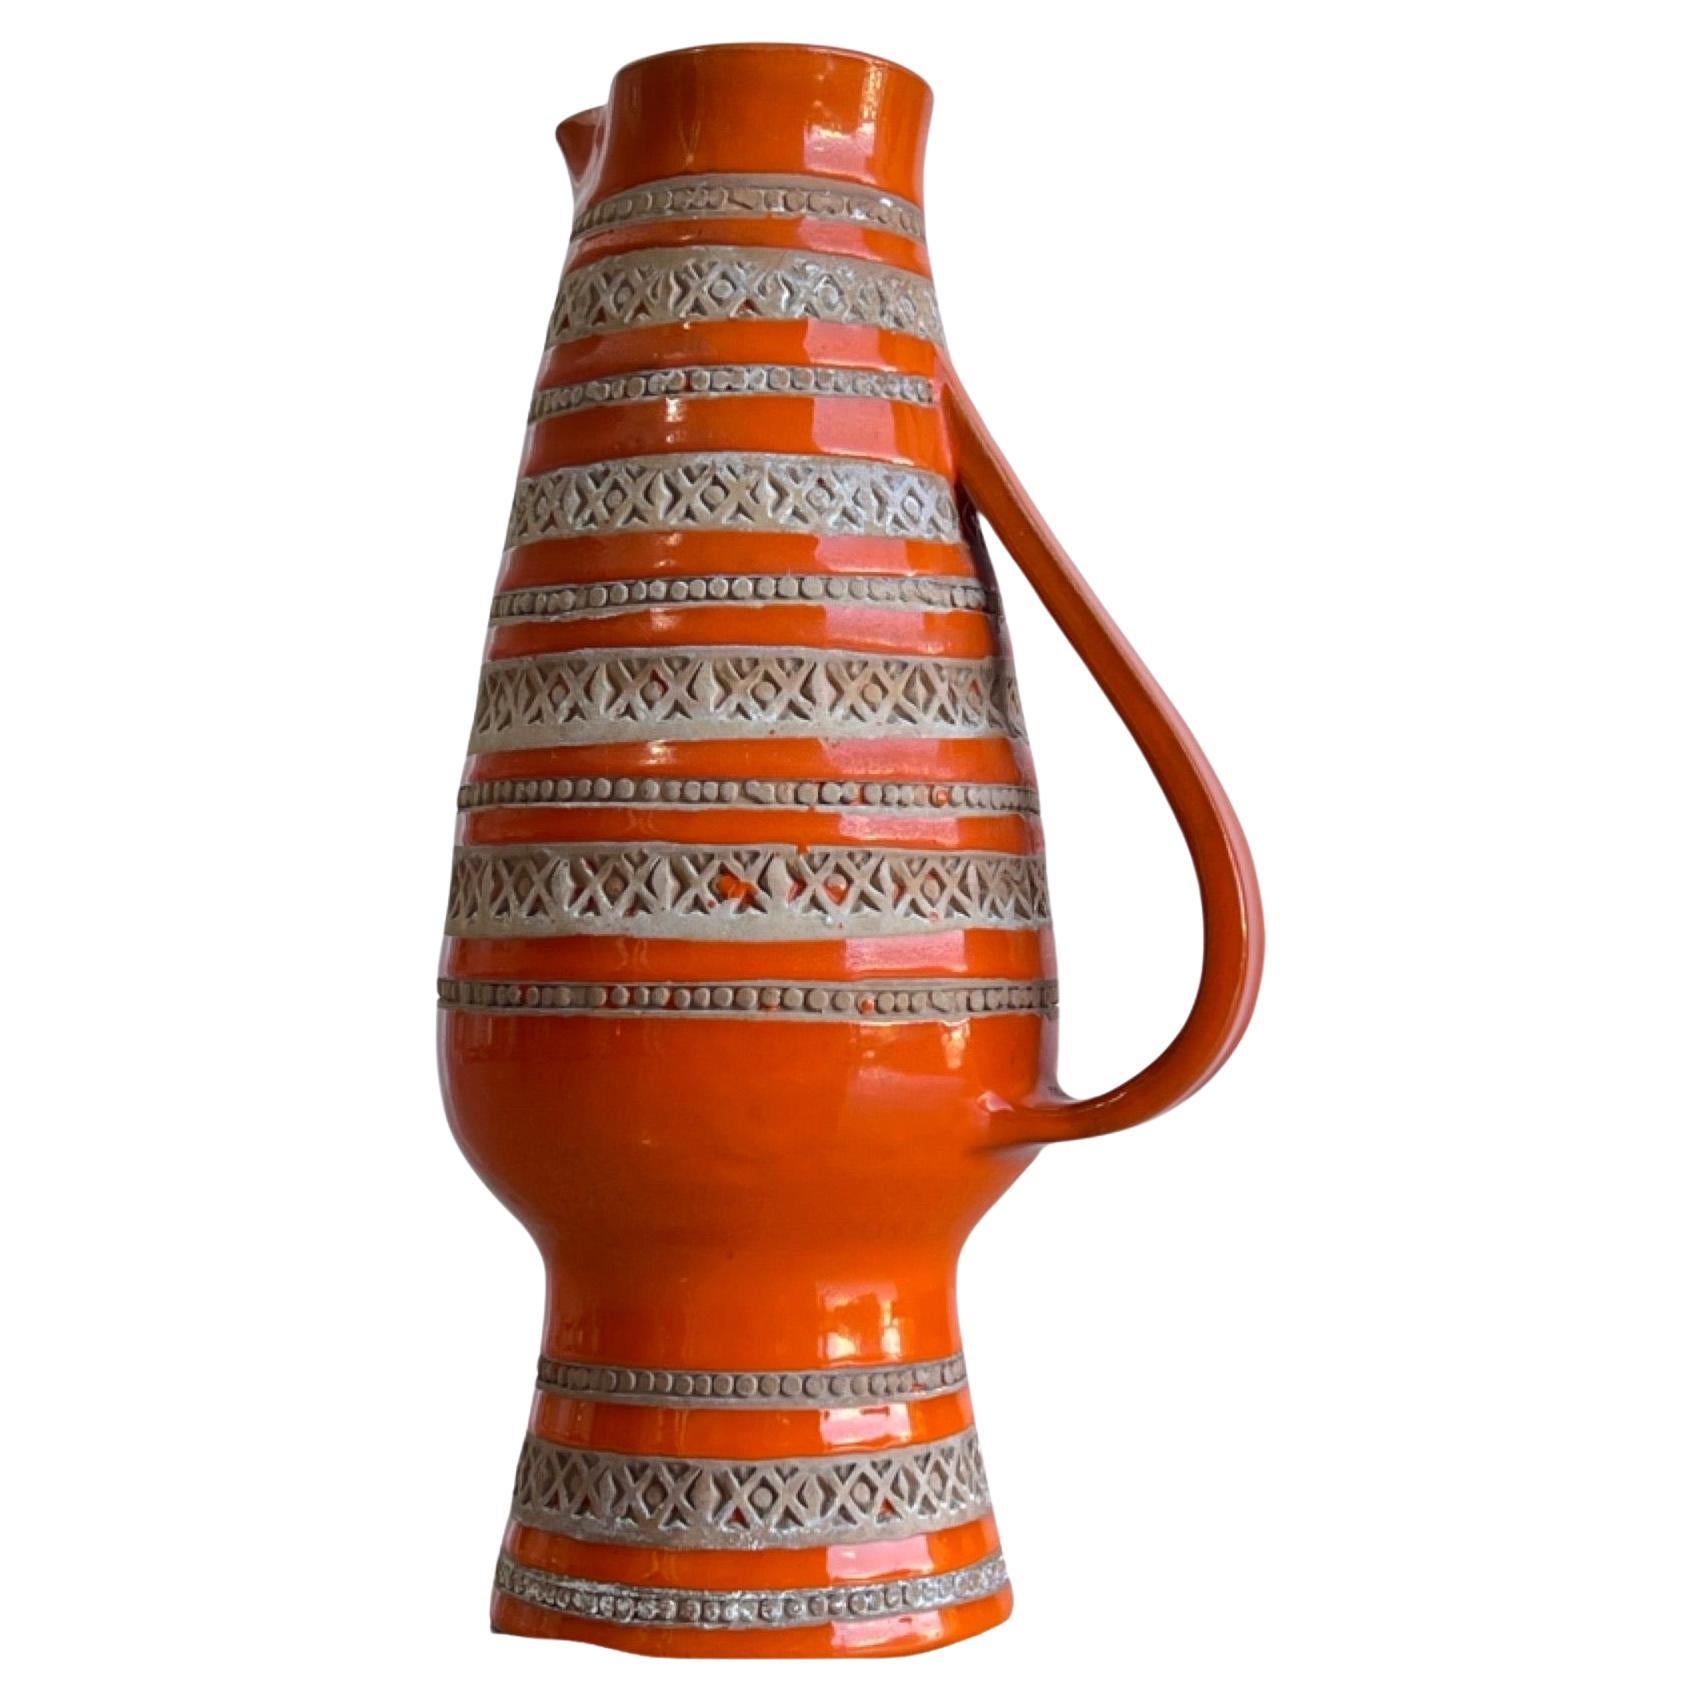 Italian orange ceramic water jar by Bitossi 1960s.
Glazed technique used by Aldo Londi, serial number and signature on the bottom of the jar.
  